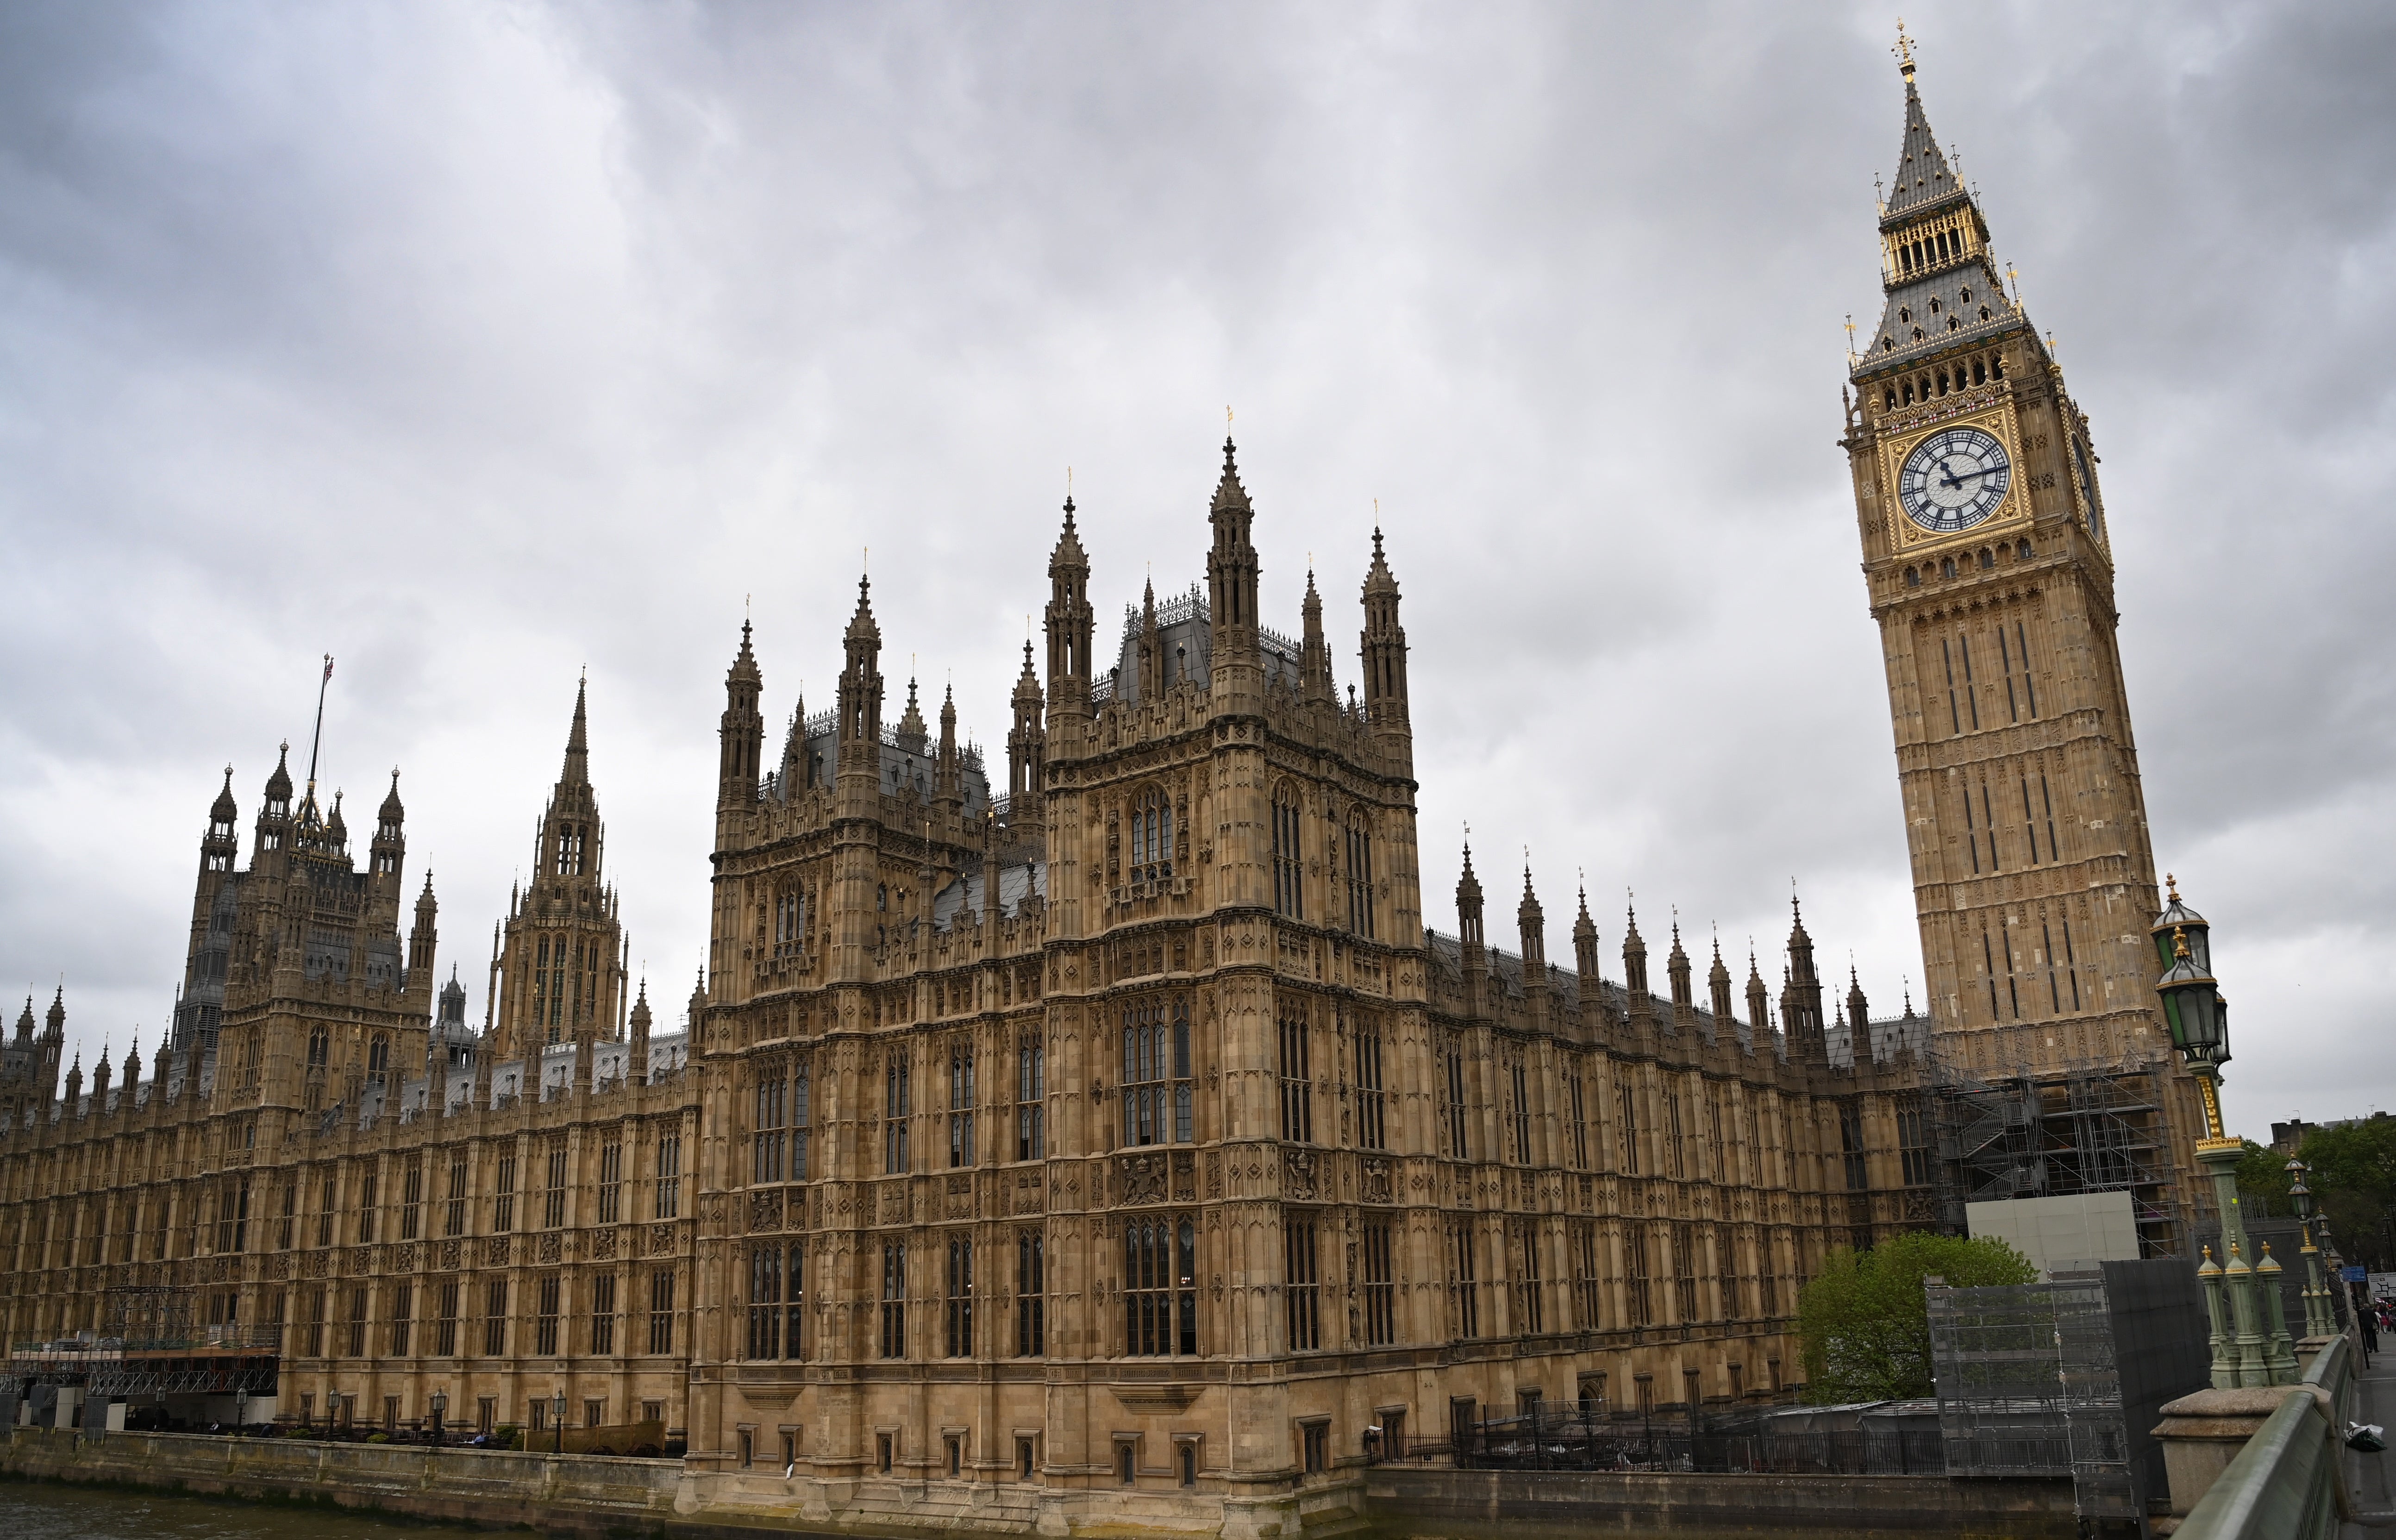 There are many reasons why dangerous behaviour can flourish inside Westminster